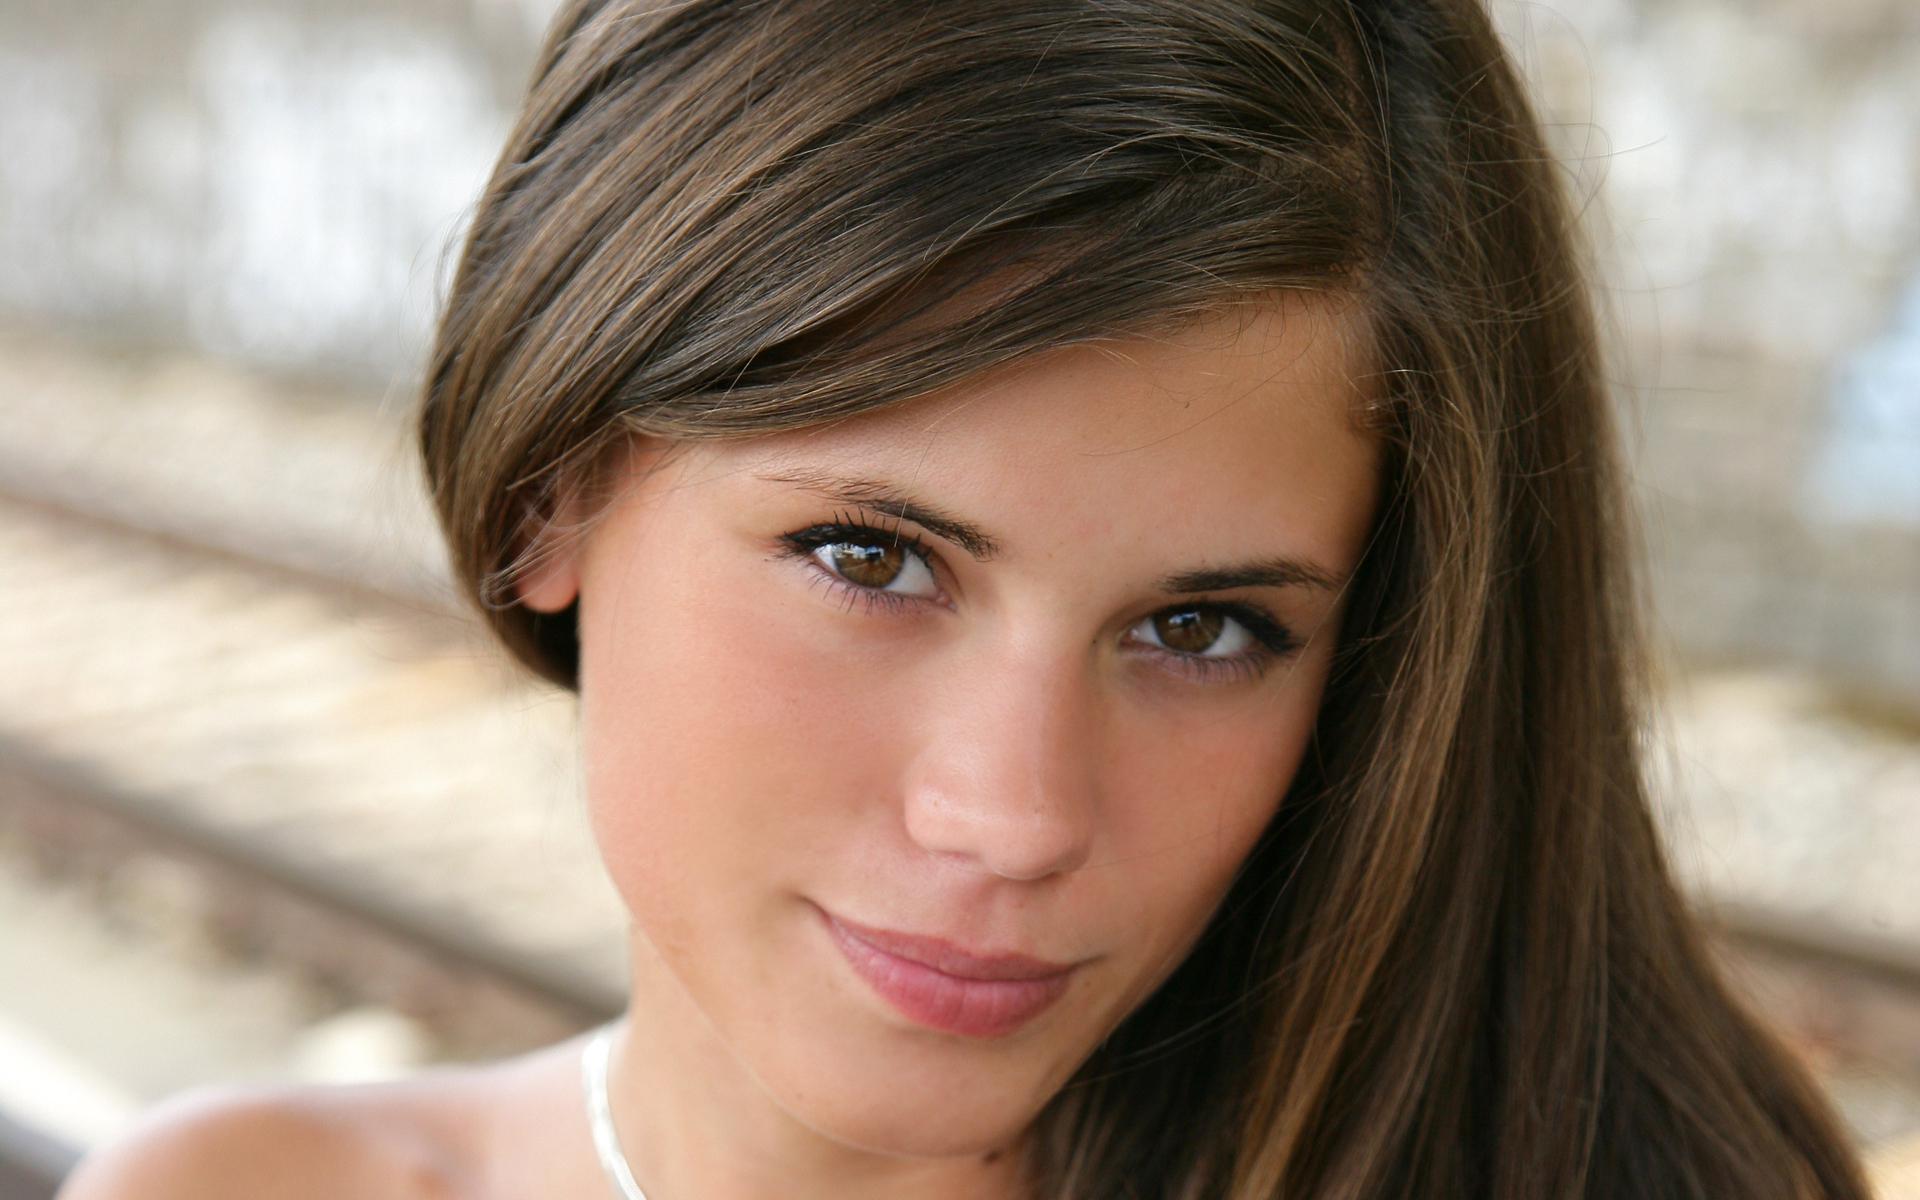 41686-little-caprice-adult-women-models-actress-sexy-babes-brunettes-females-face-eyes-pov.jpg